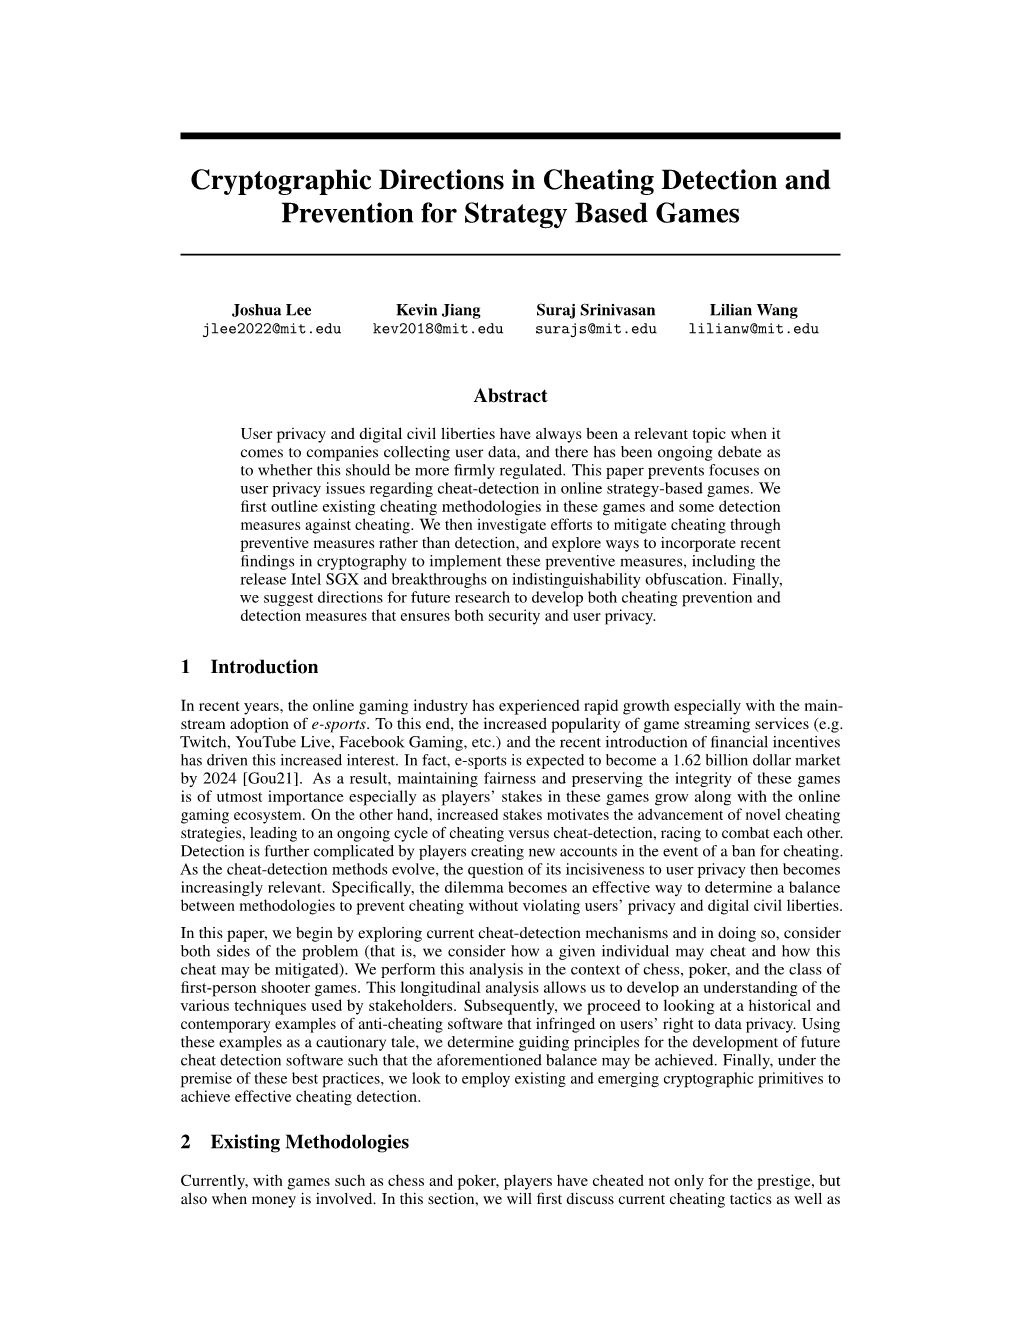 Cryptographic Directions in Cheating Detection and Prevention for Strategy Based Games